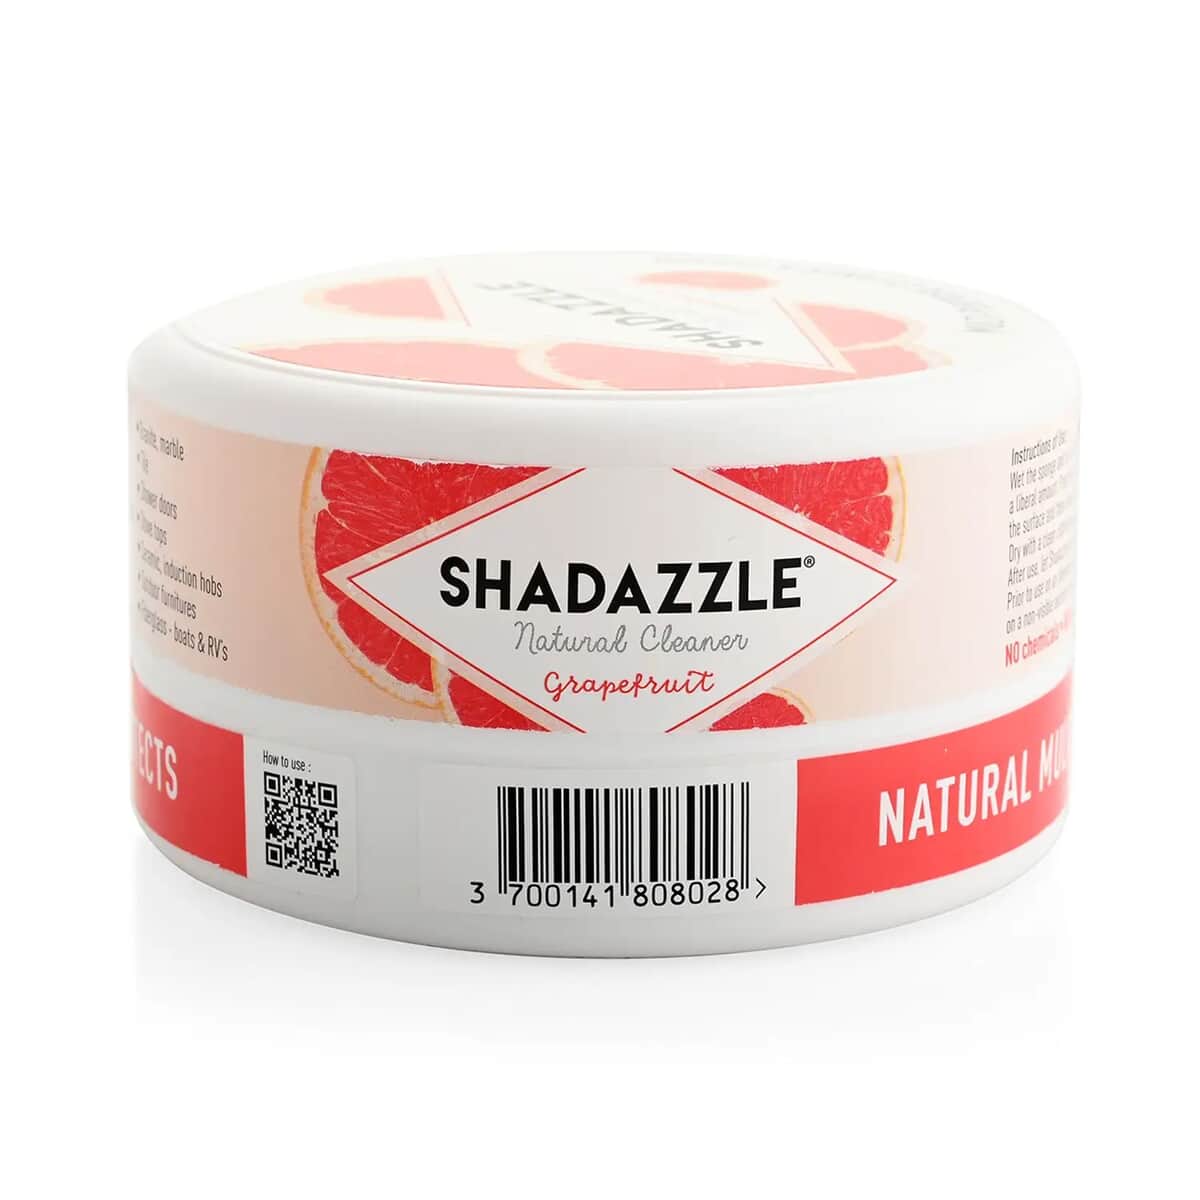 Shadazzle Multi-purpose Cleaner and Polish For Removing Tough Stains, Aluminium Wheels Cleaner, Copper Pots and Pans Cleaner- Grapefruit image number 0